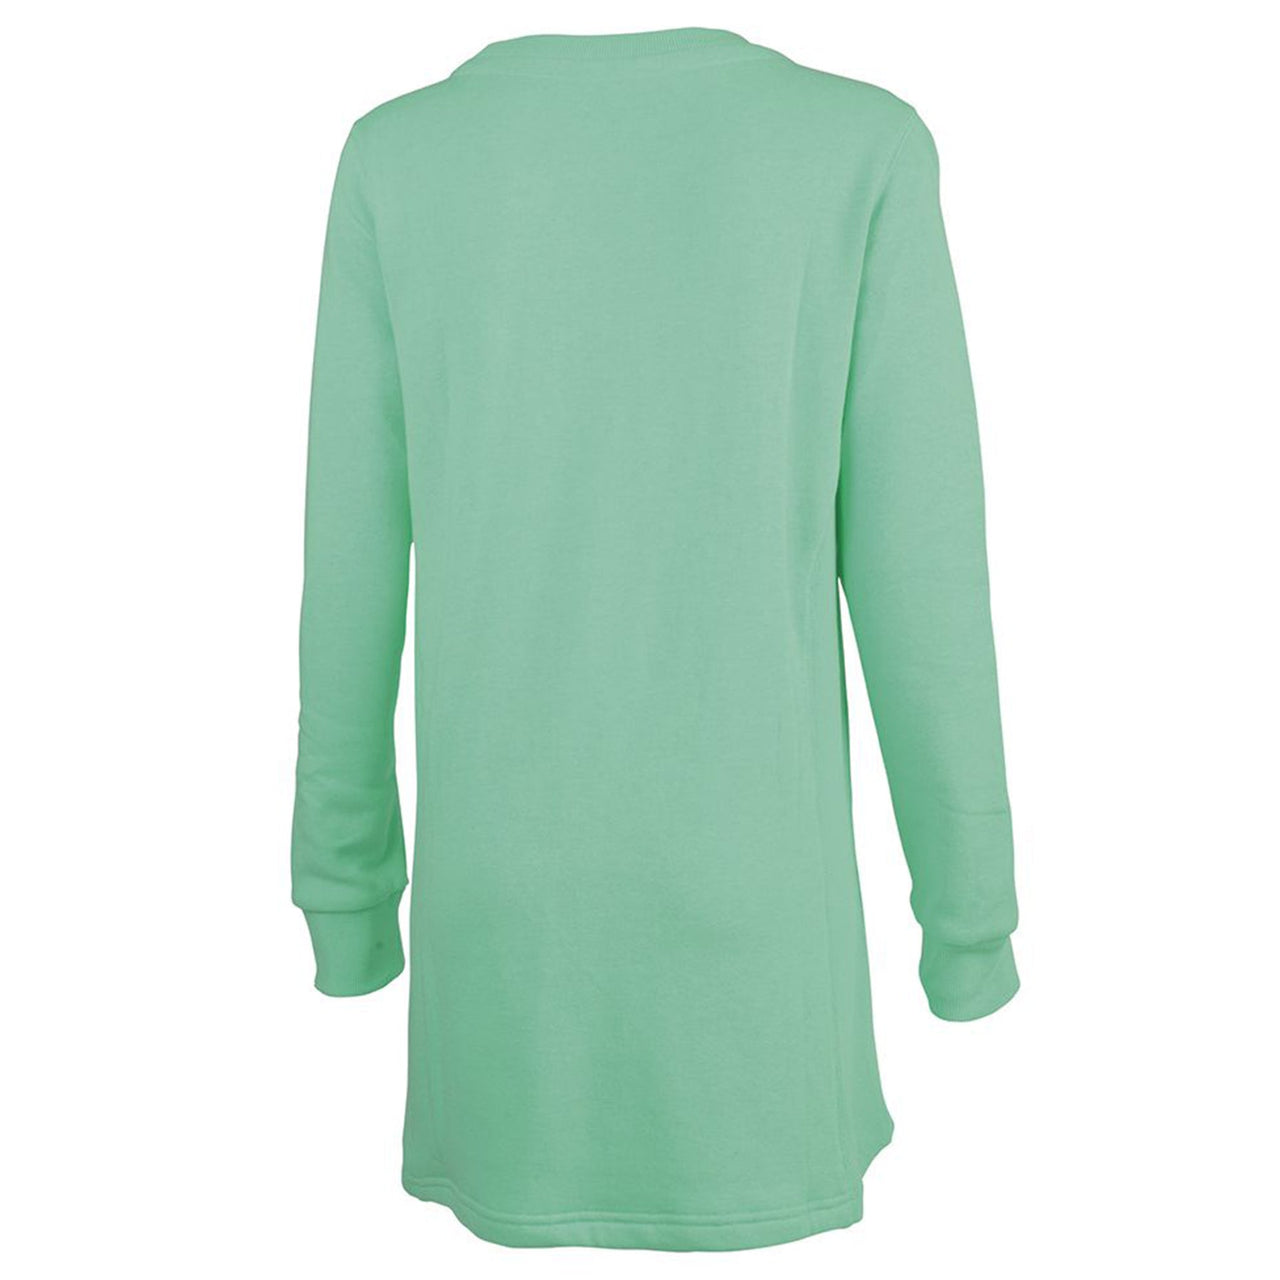 the body of the women's mint crew-neck sweater is slightly extended